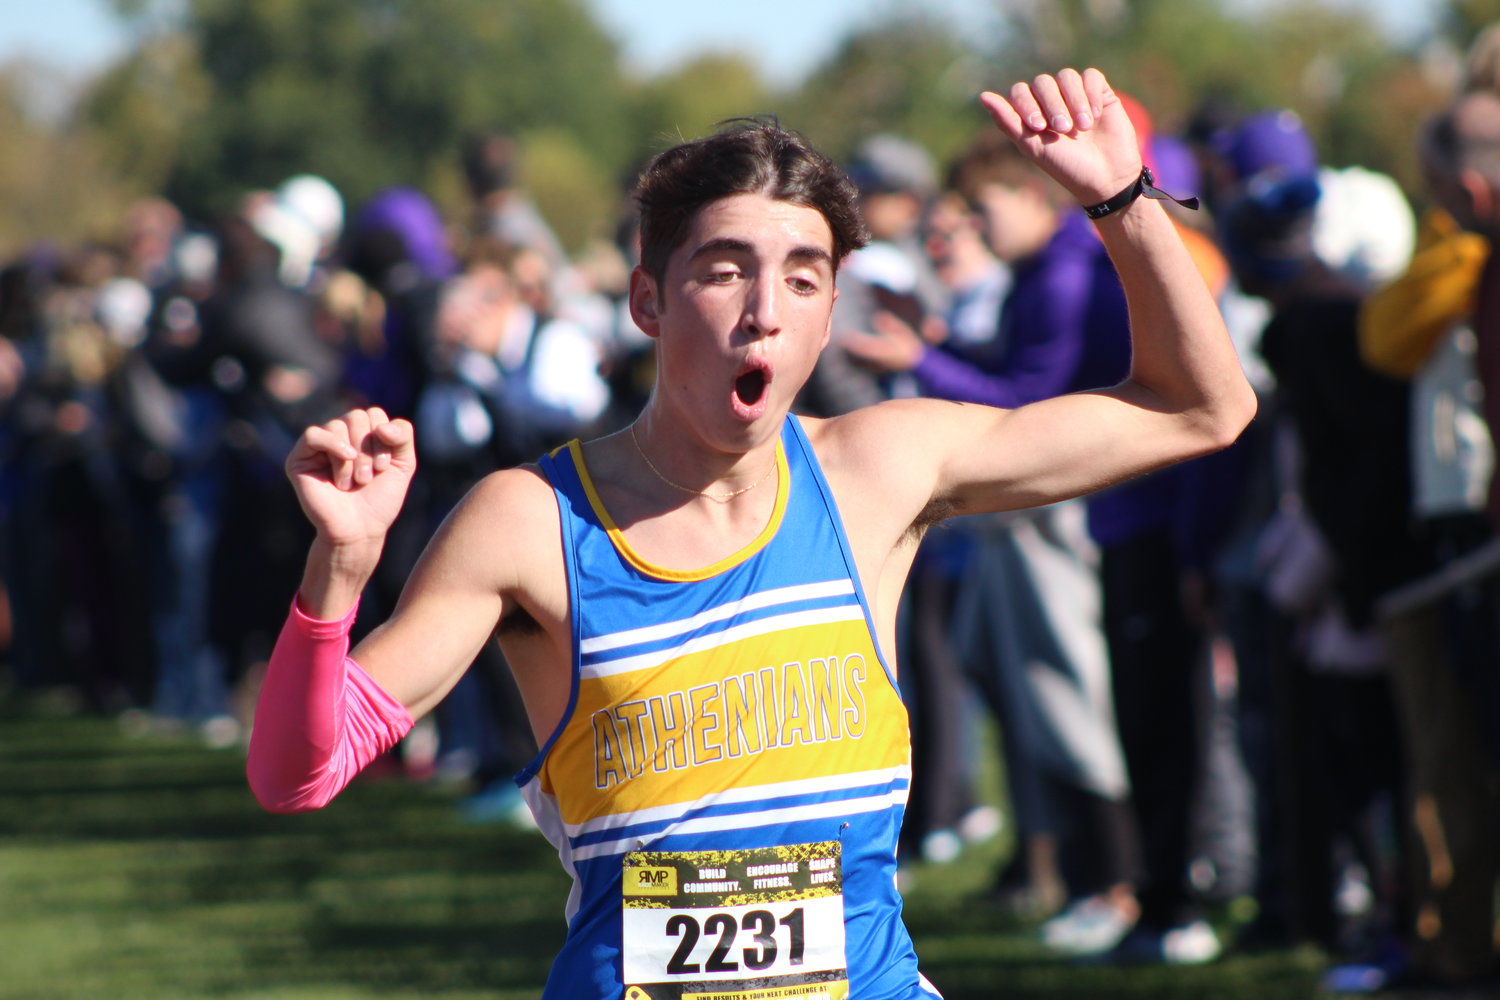 Crawfordsville’s Ryan Miller reacts to breaking the school record as he crosses the finish line at the Brownsburg sectional.